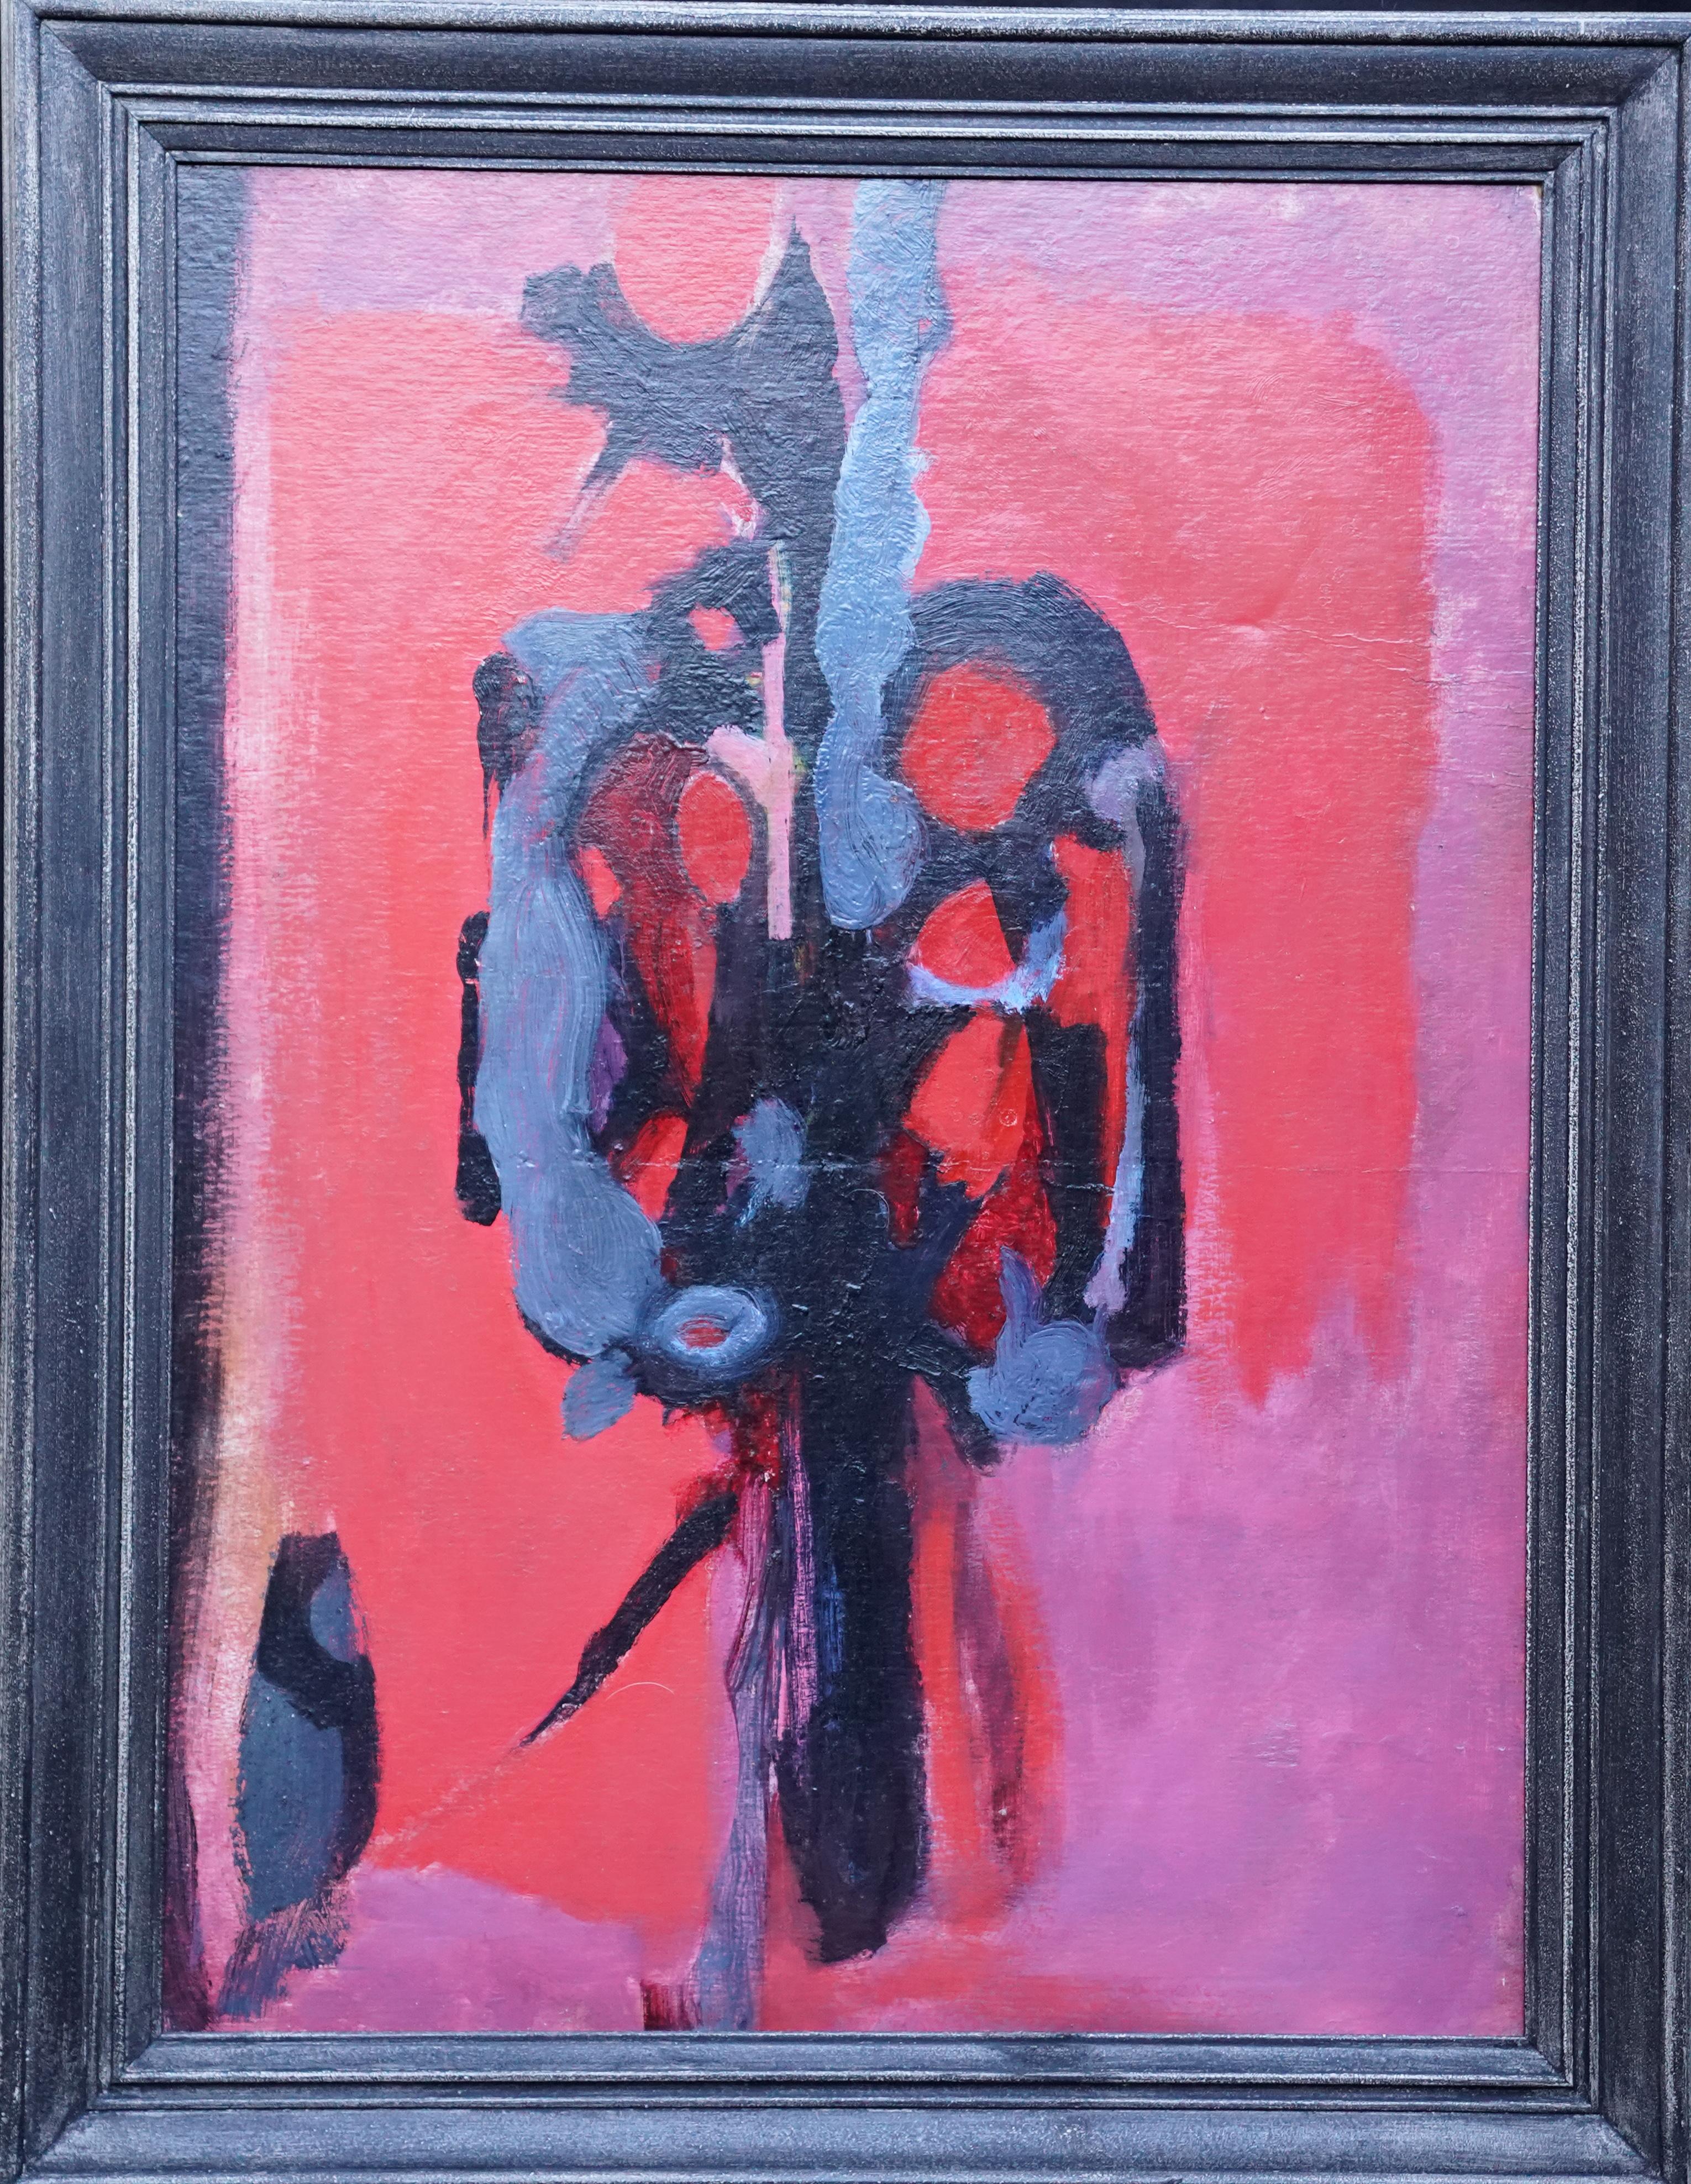 Bernard Kay Abstract Painting - Red Abstract, London 1955 - British Abstract Expressionist art oil painting